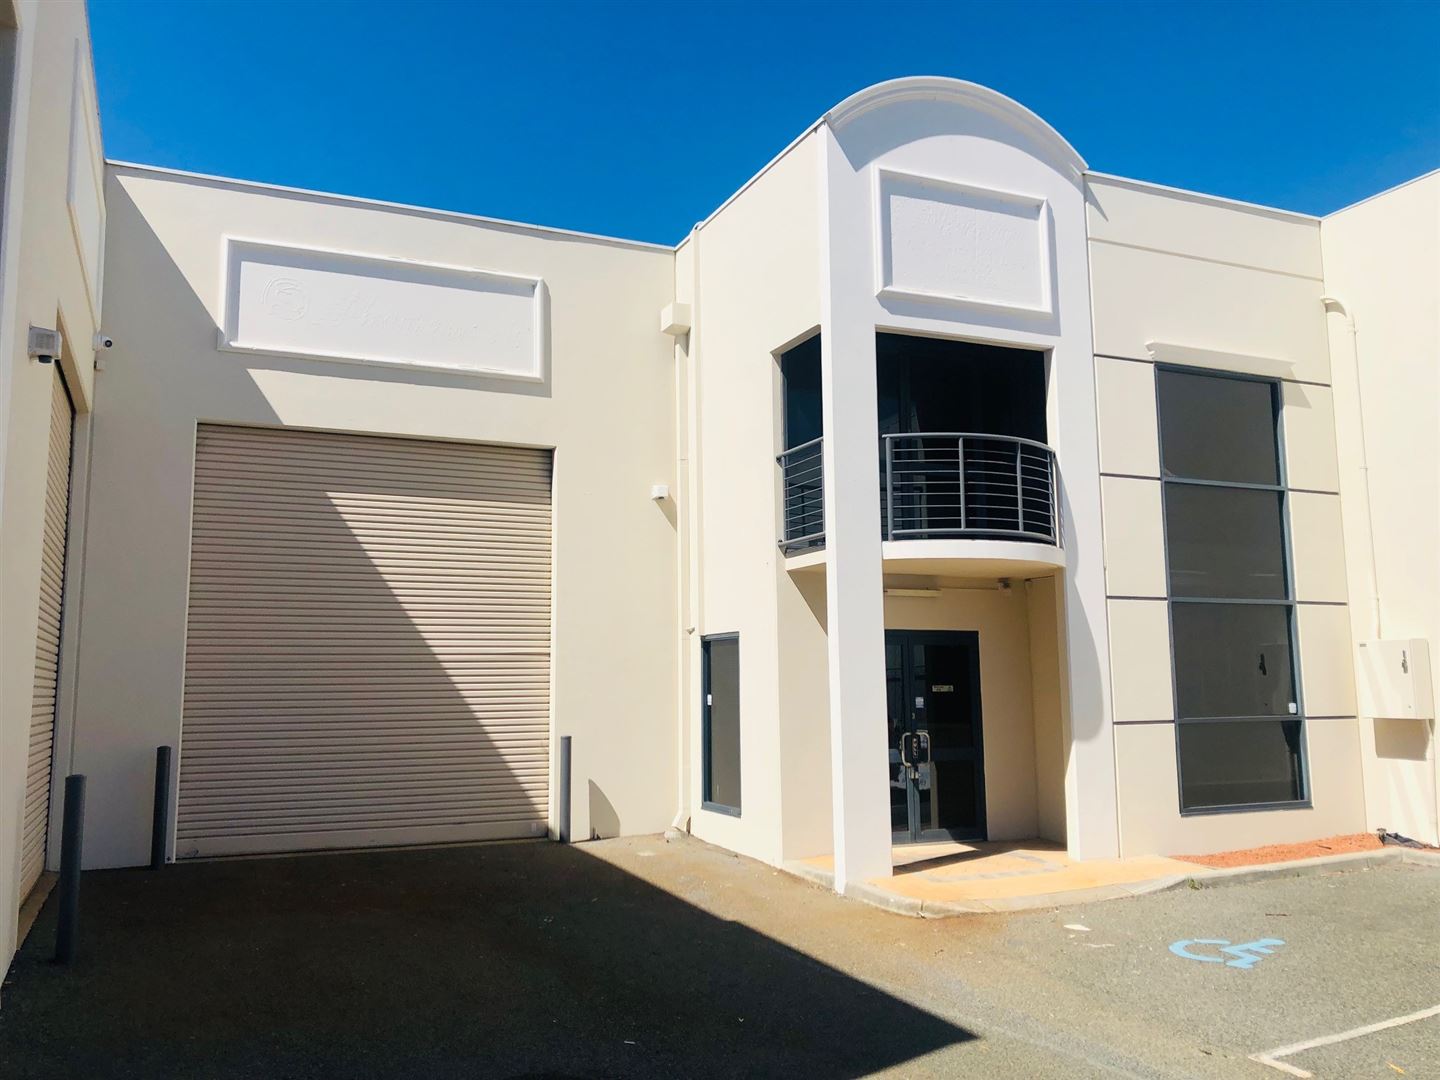 3/36 Millrose Drive, Malaga WA 6090 - Sold Office | Commercial Real Estate